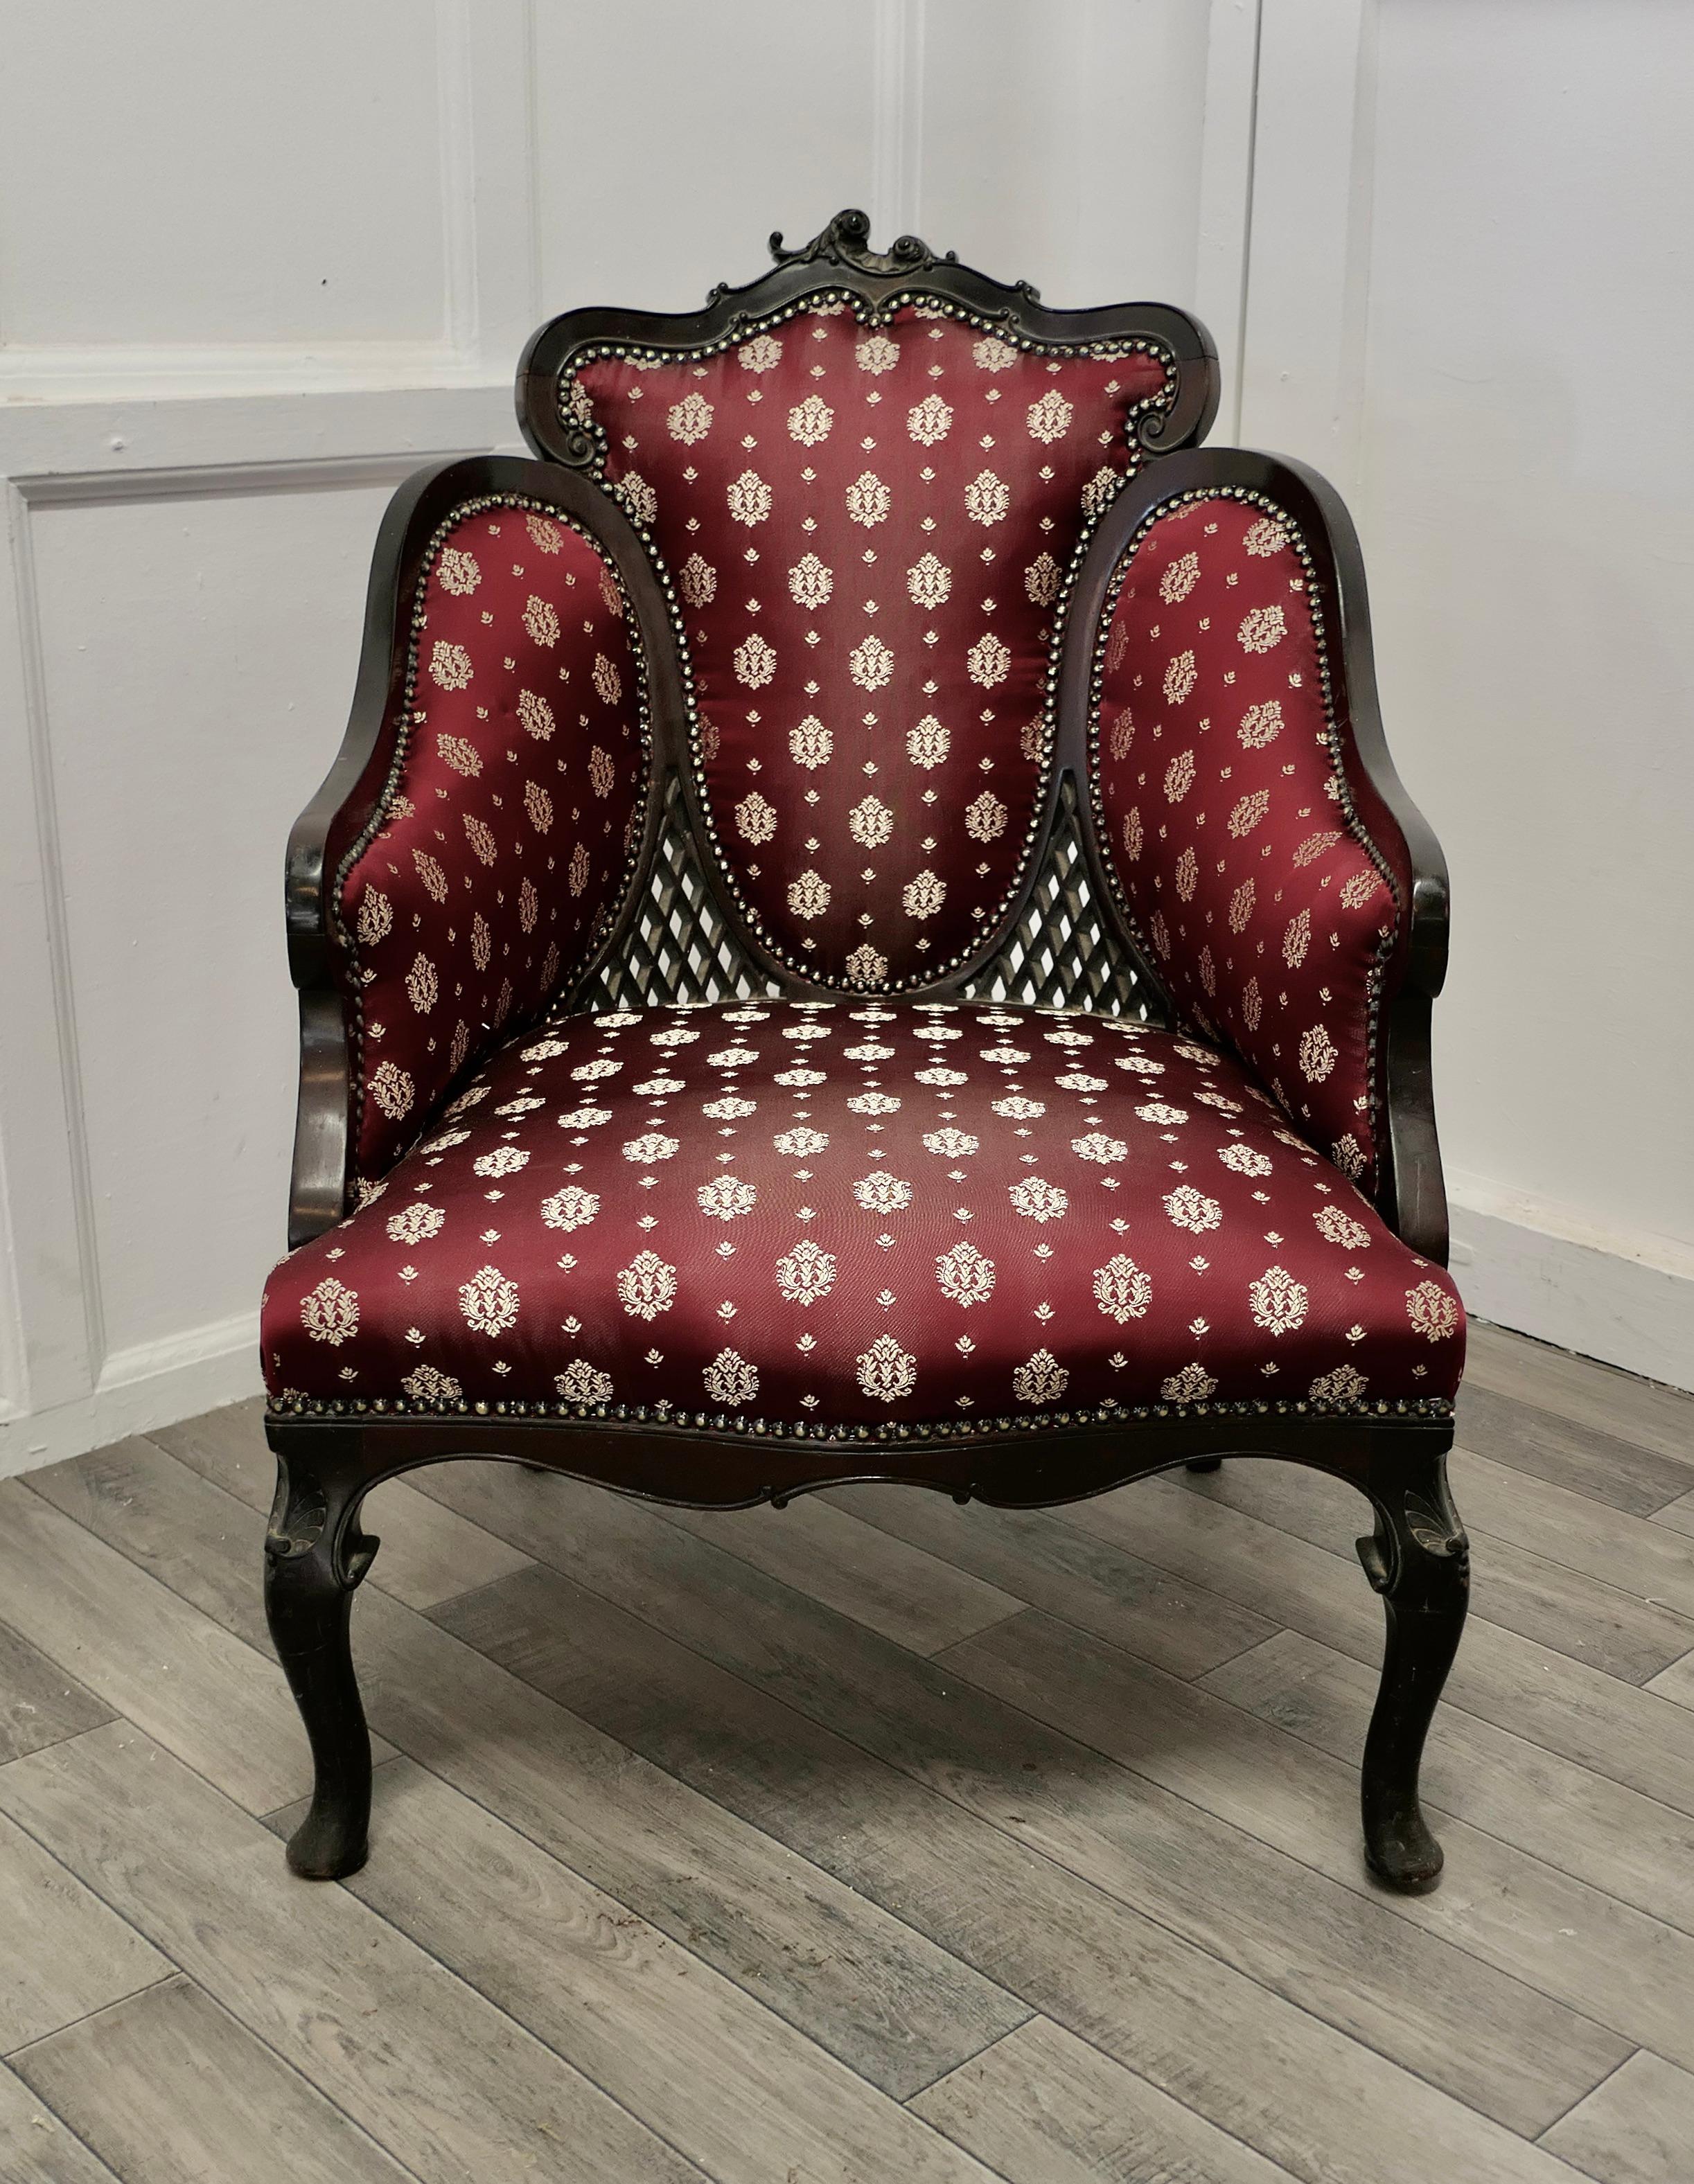 Fine quality Victorian salon chair, upholstered in regency silk fabric.

This beautiful carved chair has been ebonised in black, as was the fashion on the death of Prince Albert, it is very stylish 
The chair has shaped fabric panels which have